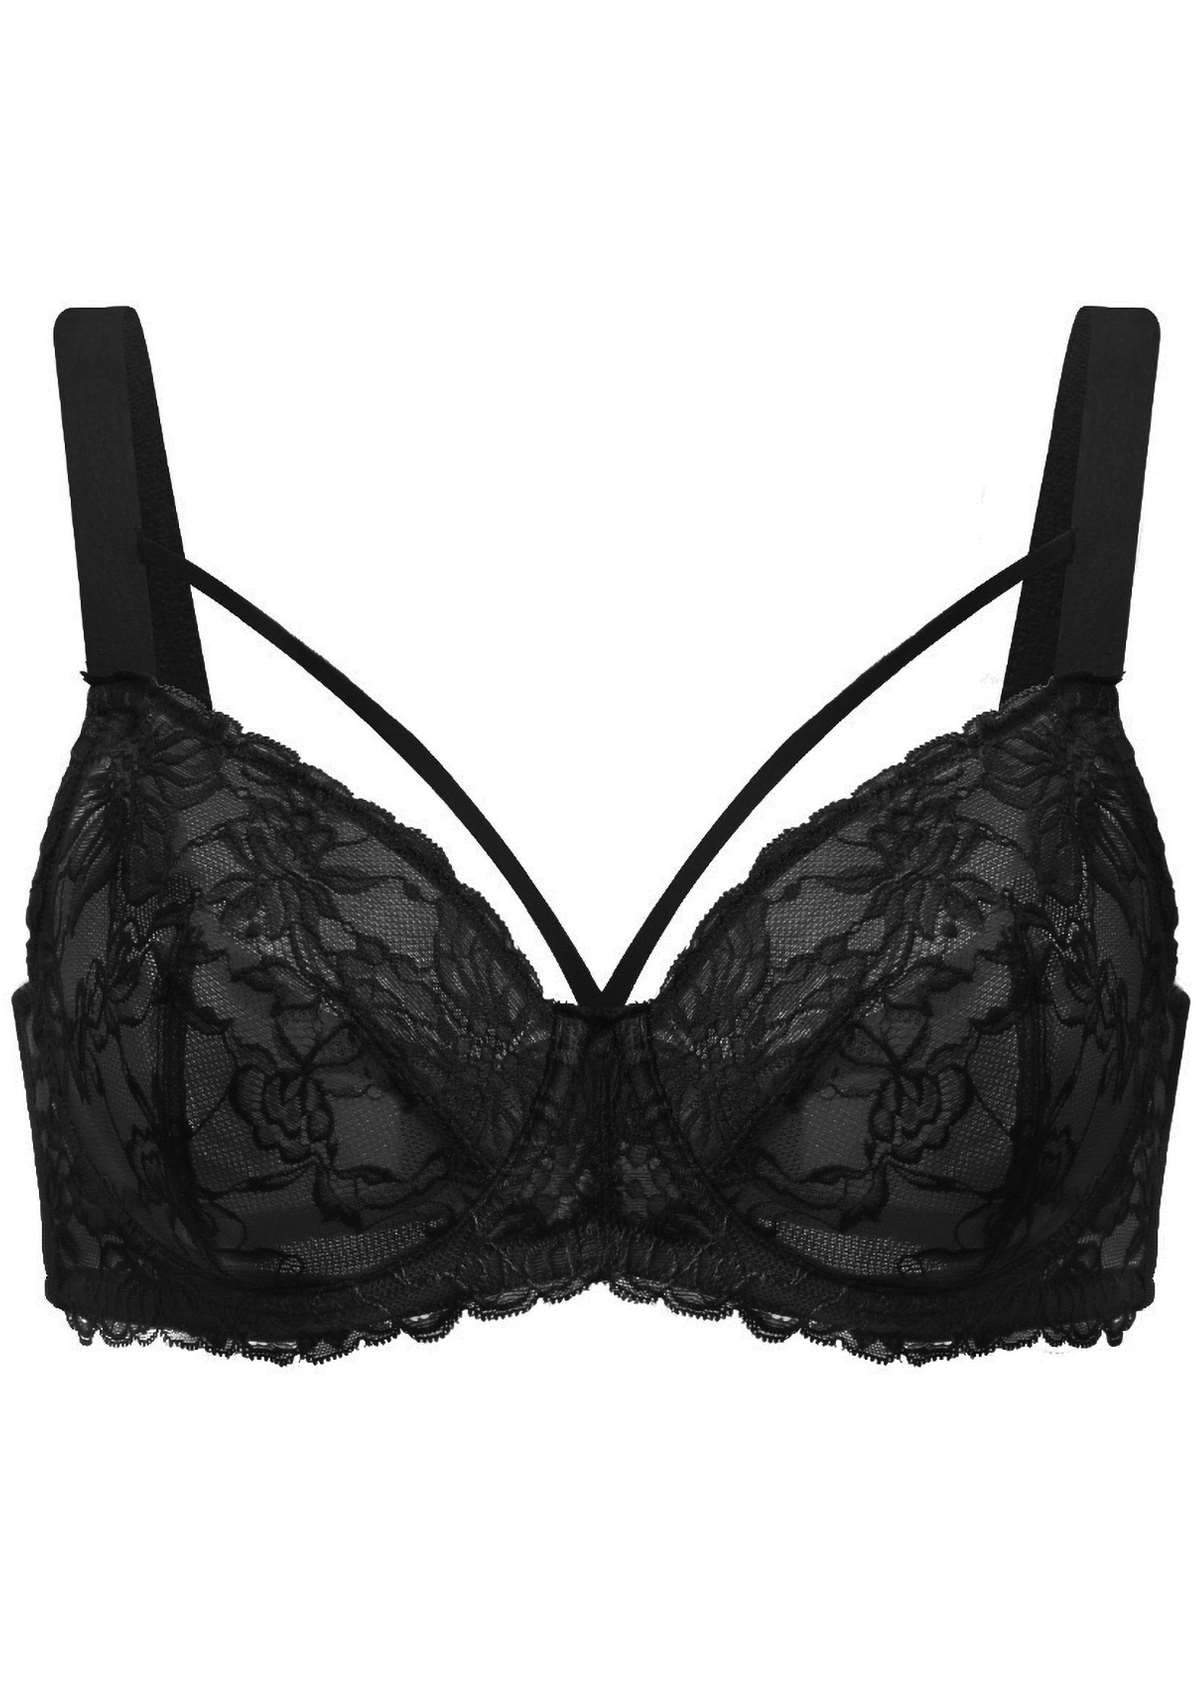 HSIA Pretty In Petals Bra - Plus Size Lingerie For Comfrot And Support - Black / 32 / B